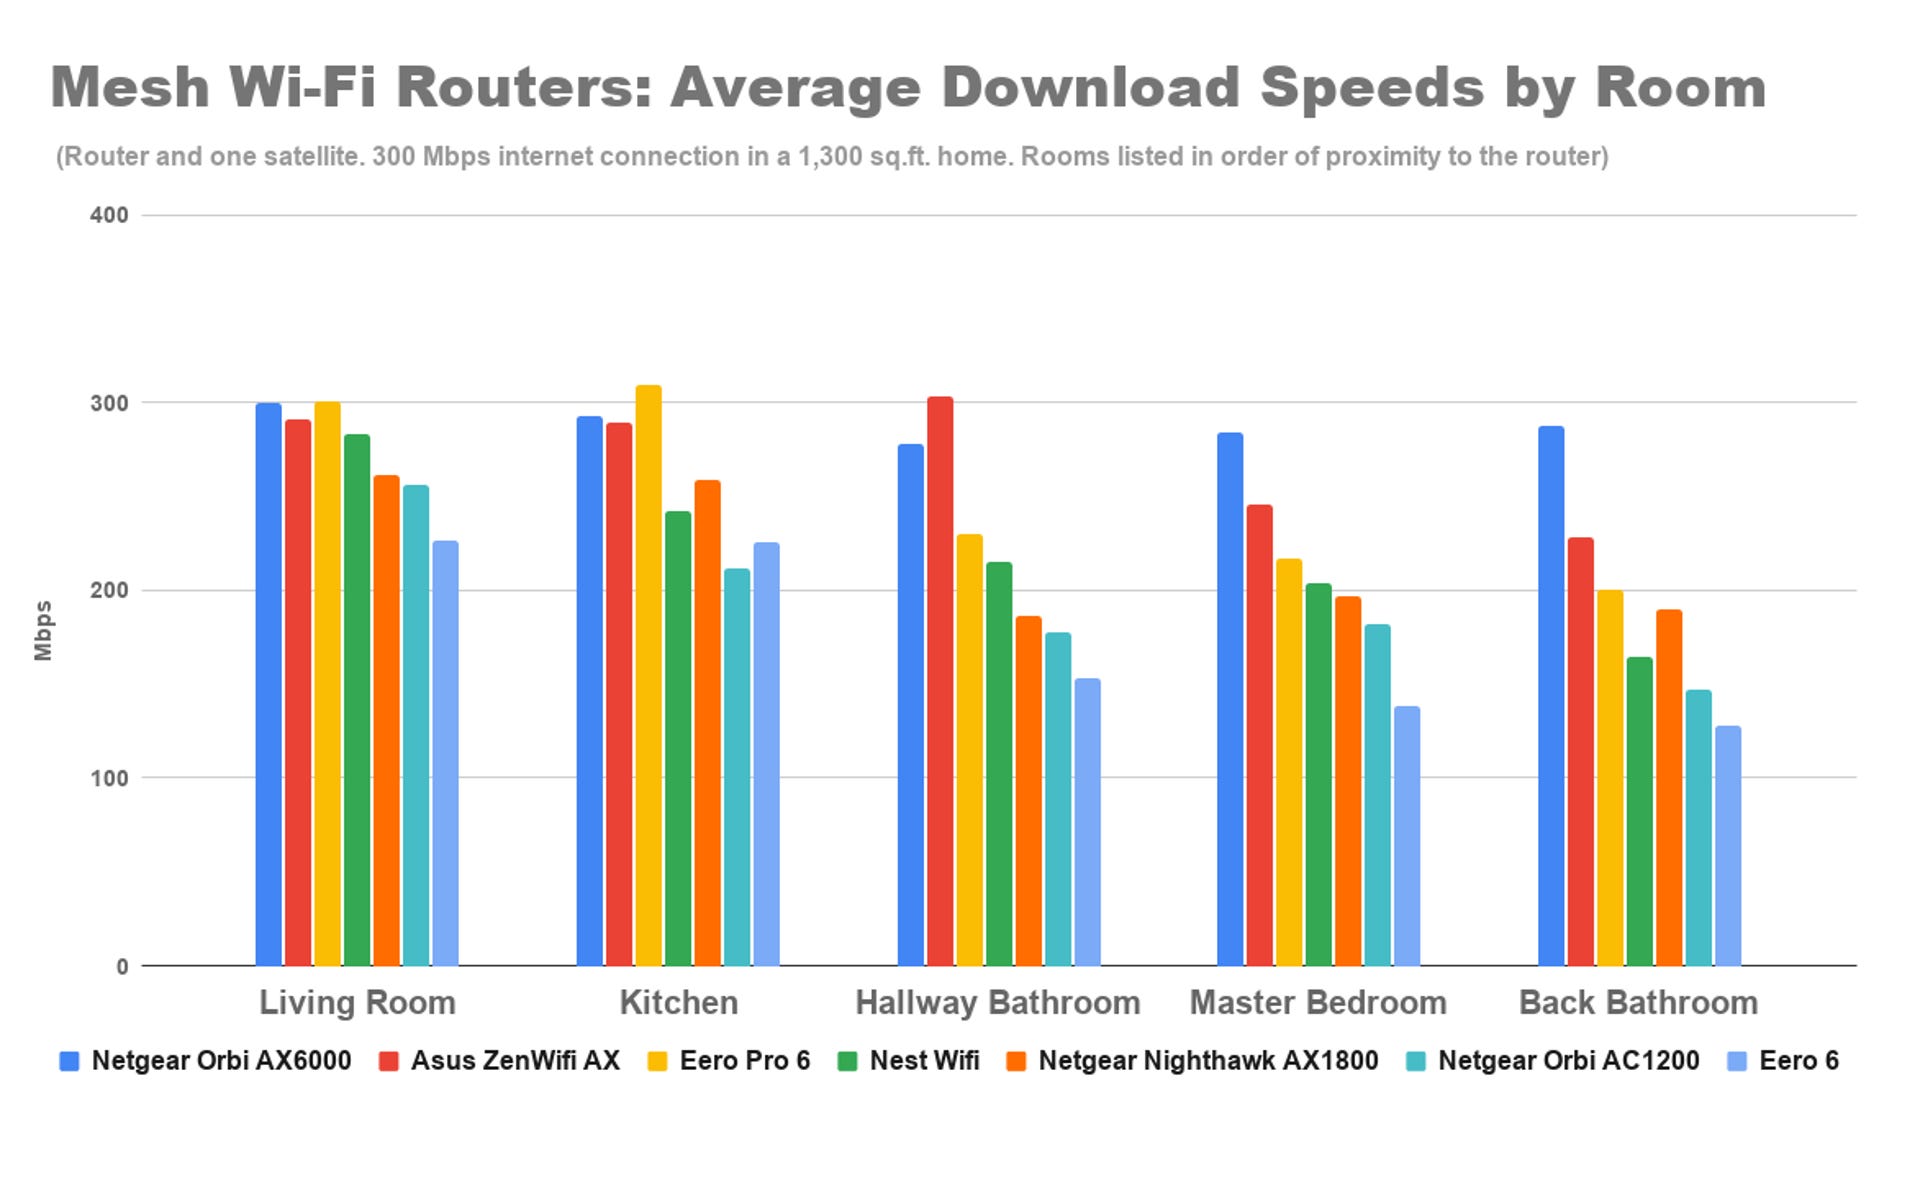 mesh-wi-fi-routers-average-download-speeds-by-room-1.png